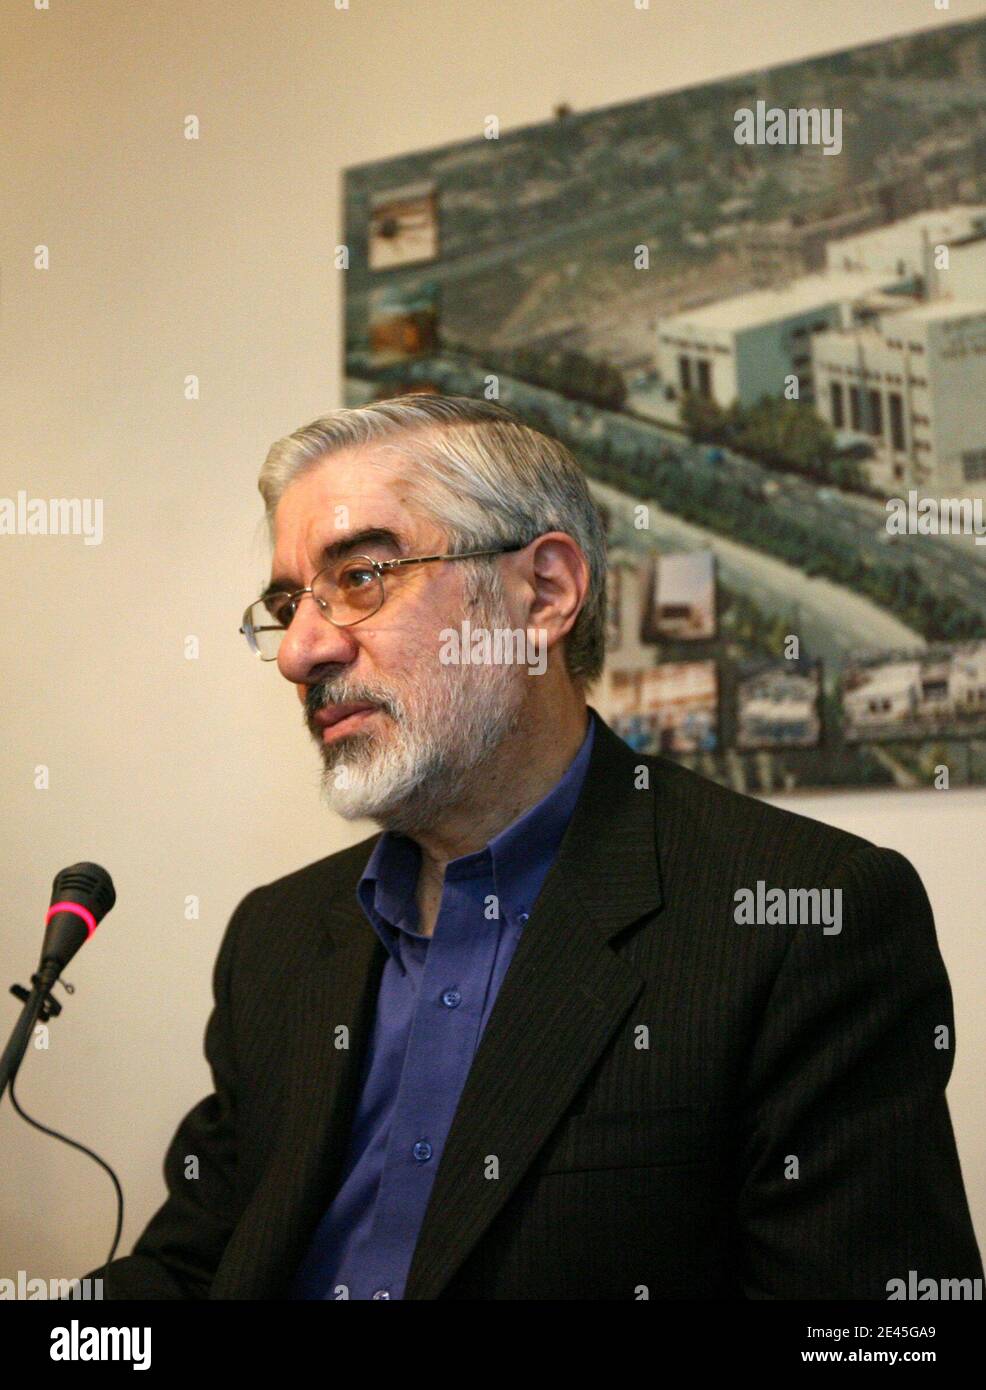 Iranian reformist presidential candidate Mir Hossein Mousavi holds a press conference in Tehran, Iran on May 29, 2009. Mousavi, a former premier, said that he is prepared to hold talks with the international P5-plus-1 group over Iran's nuclear drive if elected, but he added that Tehran would continue its nuclear programme. Photo by Farzaneh Khademian/ABACAPRESS.COM Stock Photo